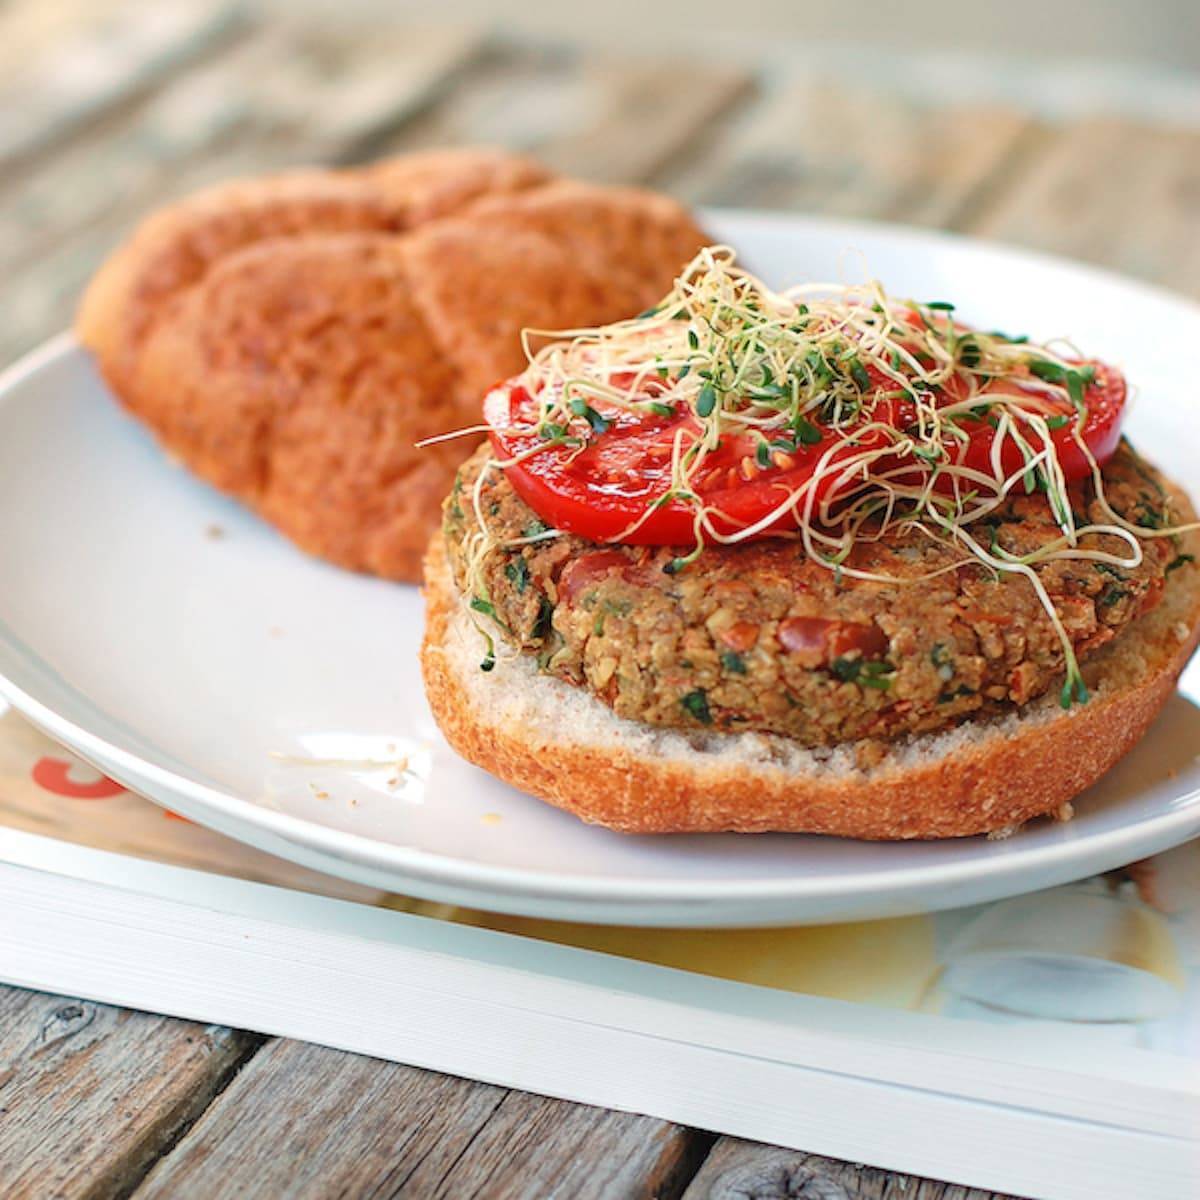 Bean burgers with pinto beans, almonds, and sunflower seeds.